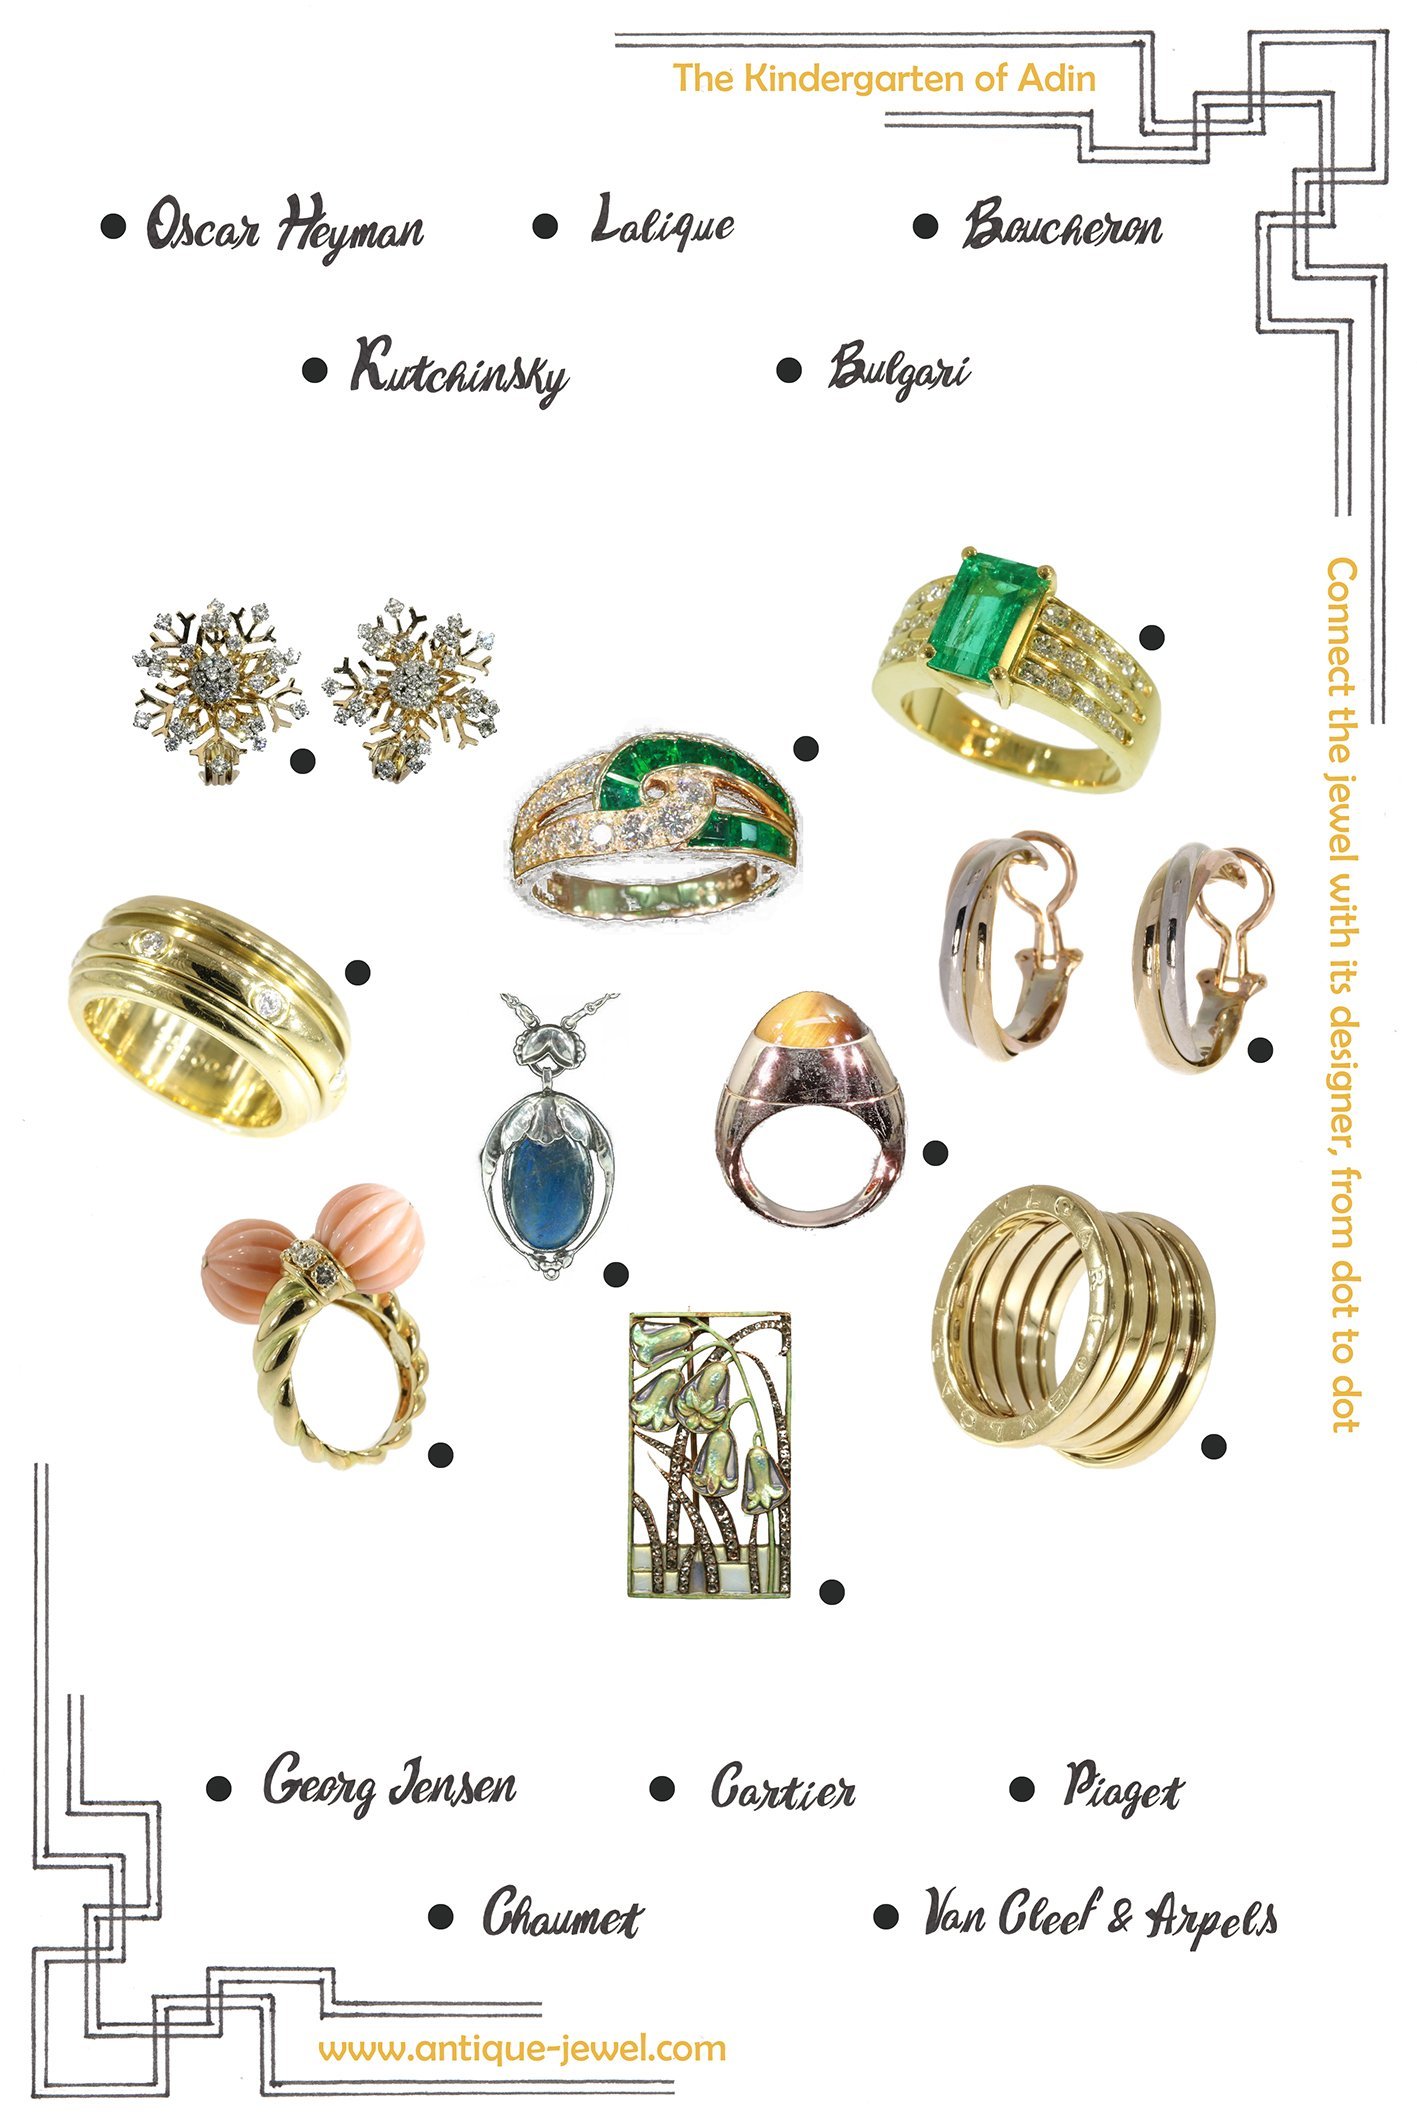 Click picture to check our extensive collection of signed vintage jewellery